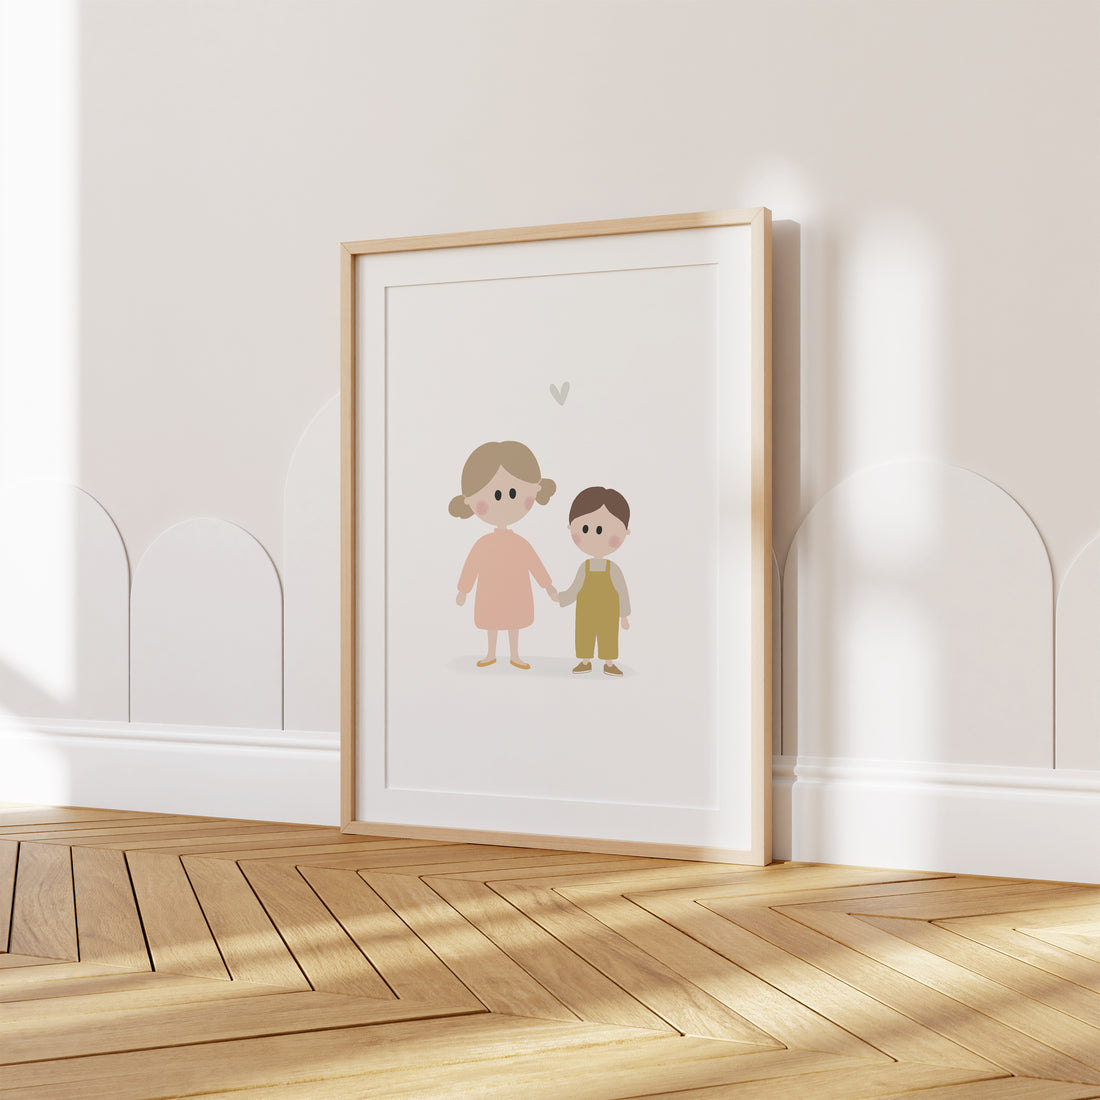 Big sister and little brother art print by Jollie Bluebear